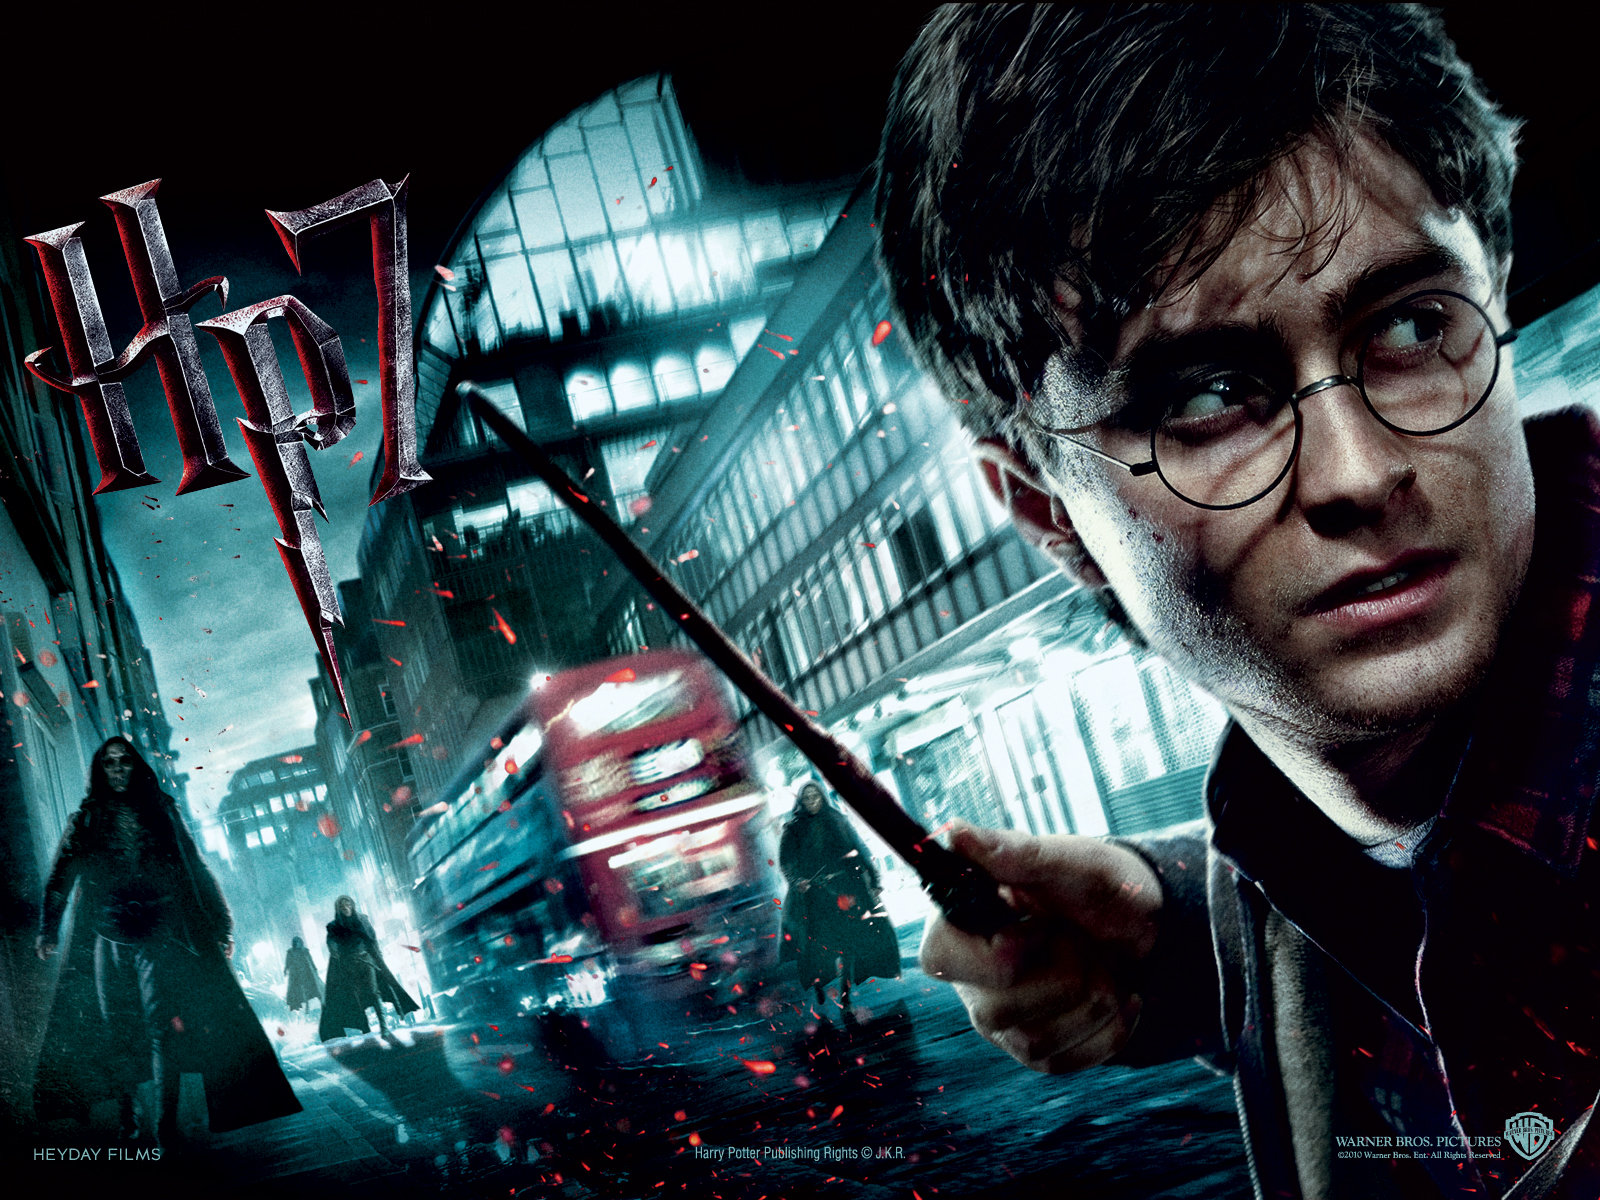 Harry Potter 3D coming to Theaters